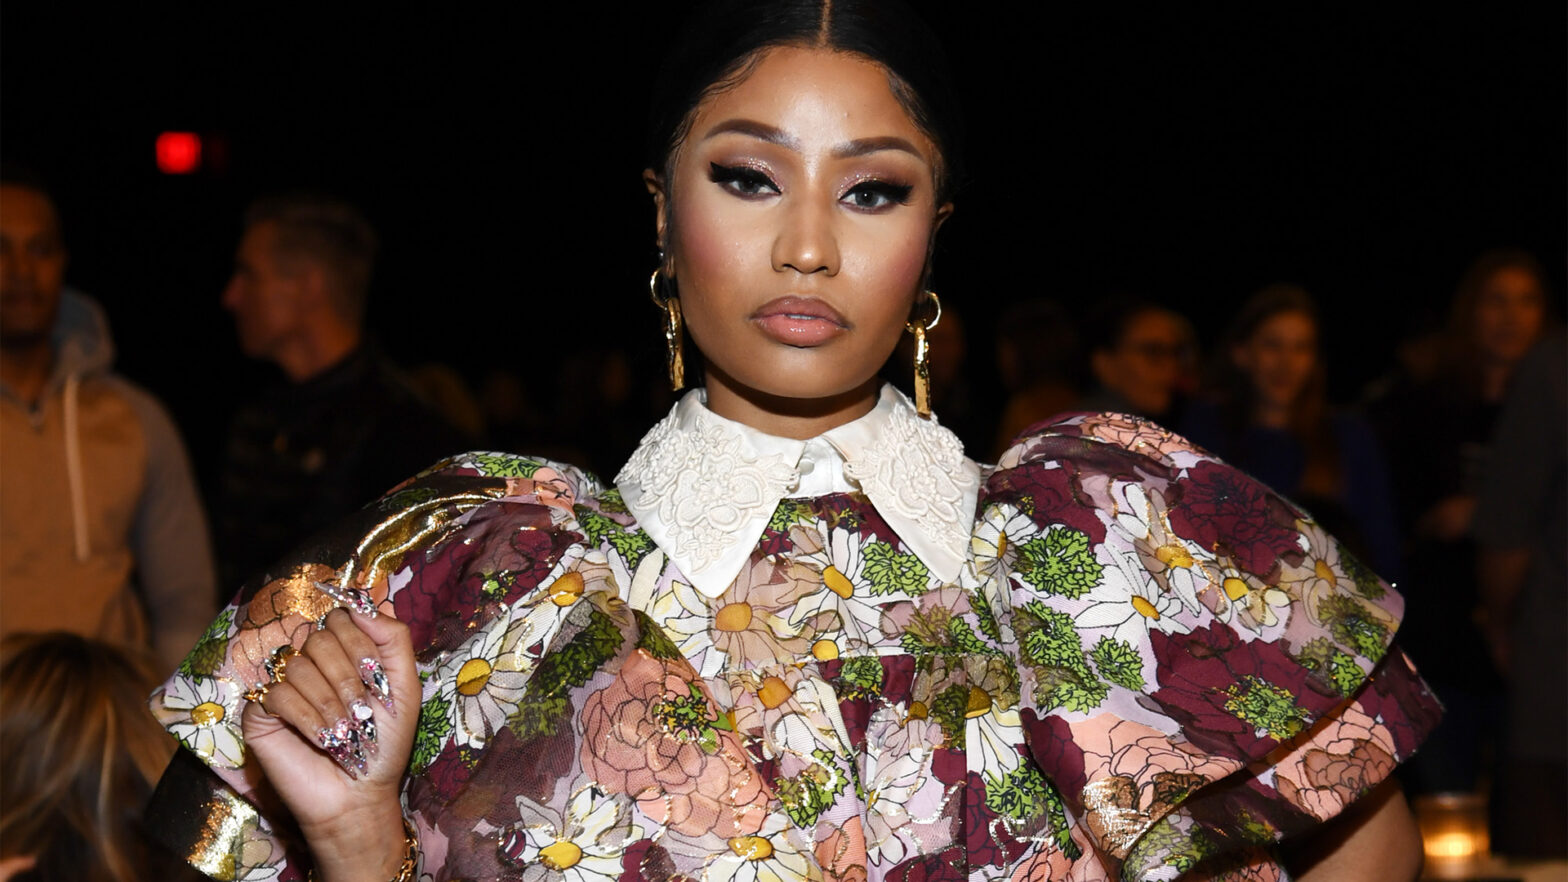 Why Nicki Minaj’s “Monster” Verse Will Forever Be A Revolutionary Pop Culture Moment